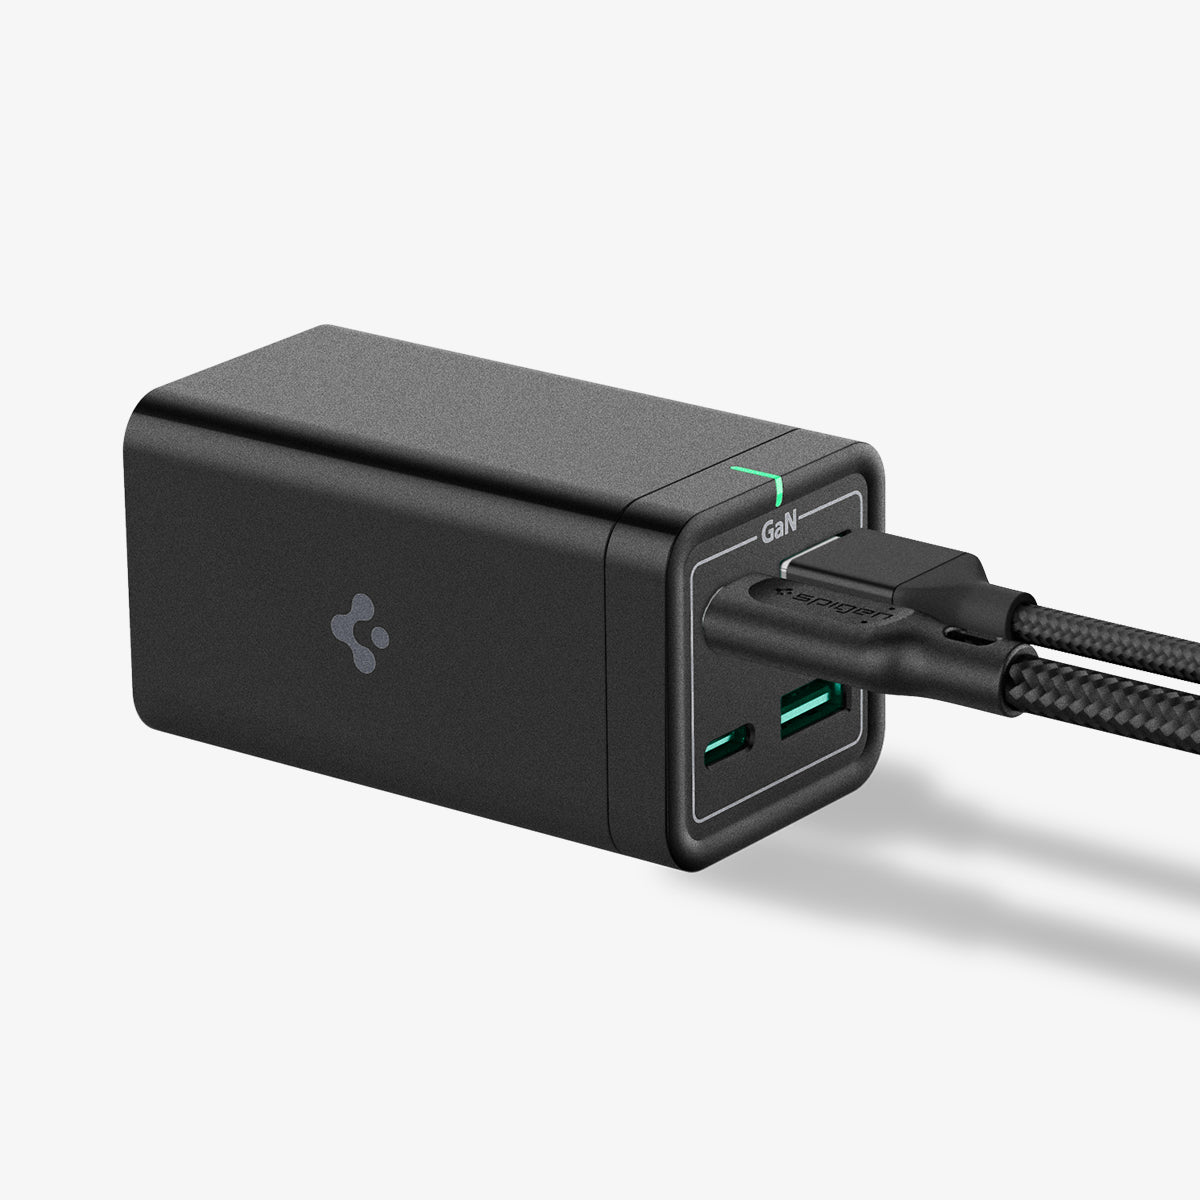 ACH03787 - Spigen ArcDock 65W Desktop Charger PD2101 in black showing the front and side with two charging cables inserted